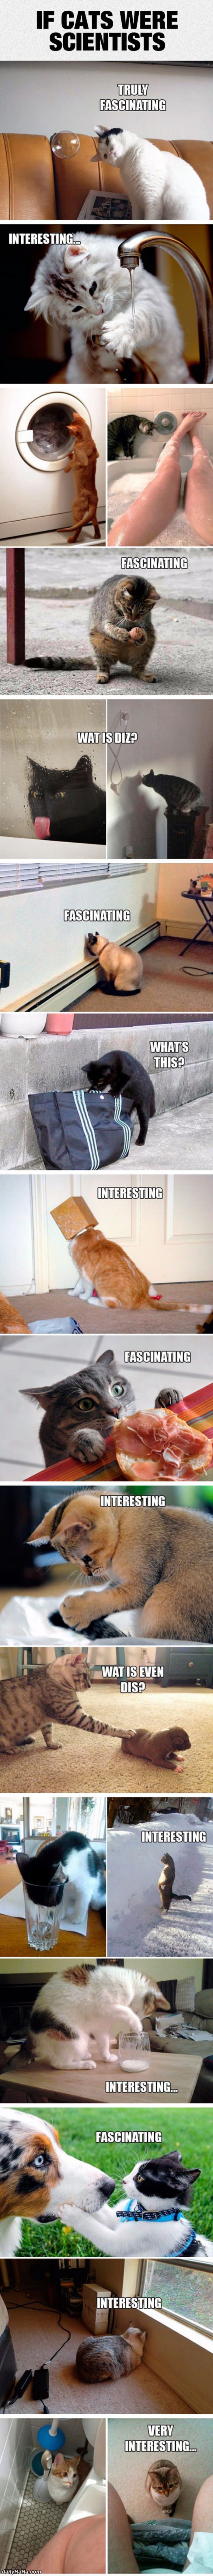 if cats were scientists funny picture